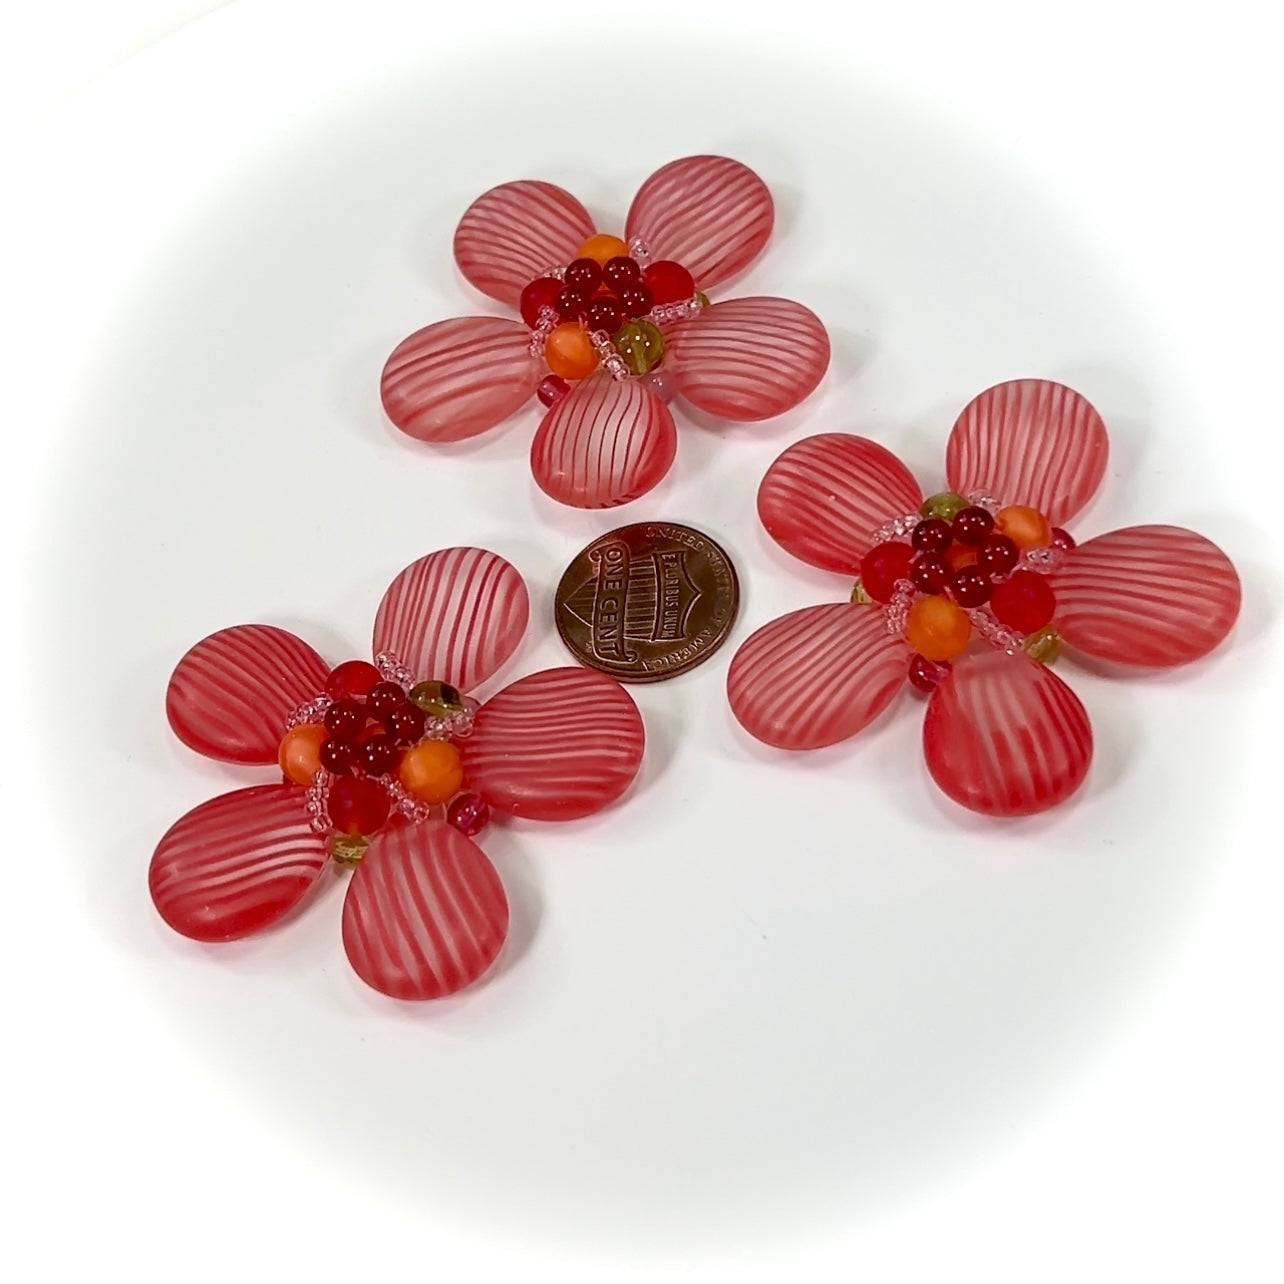 Czech Glass Beads 2 inch Flower Ornament Red Striped Multi Combination 1 piece CA003